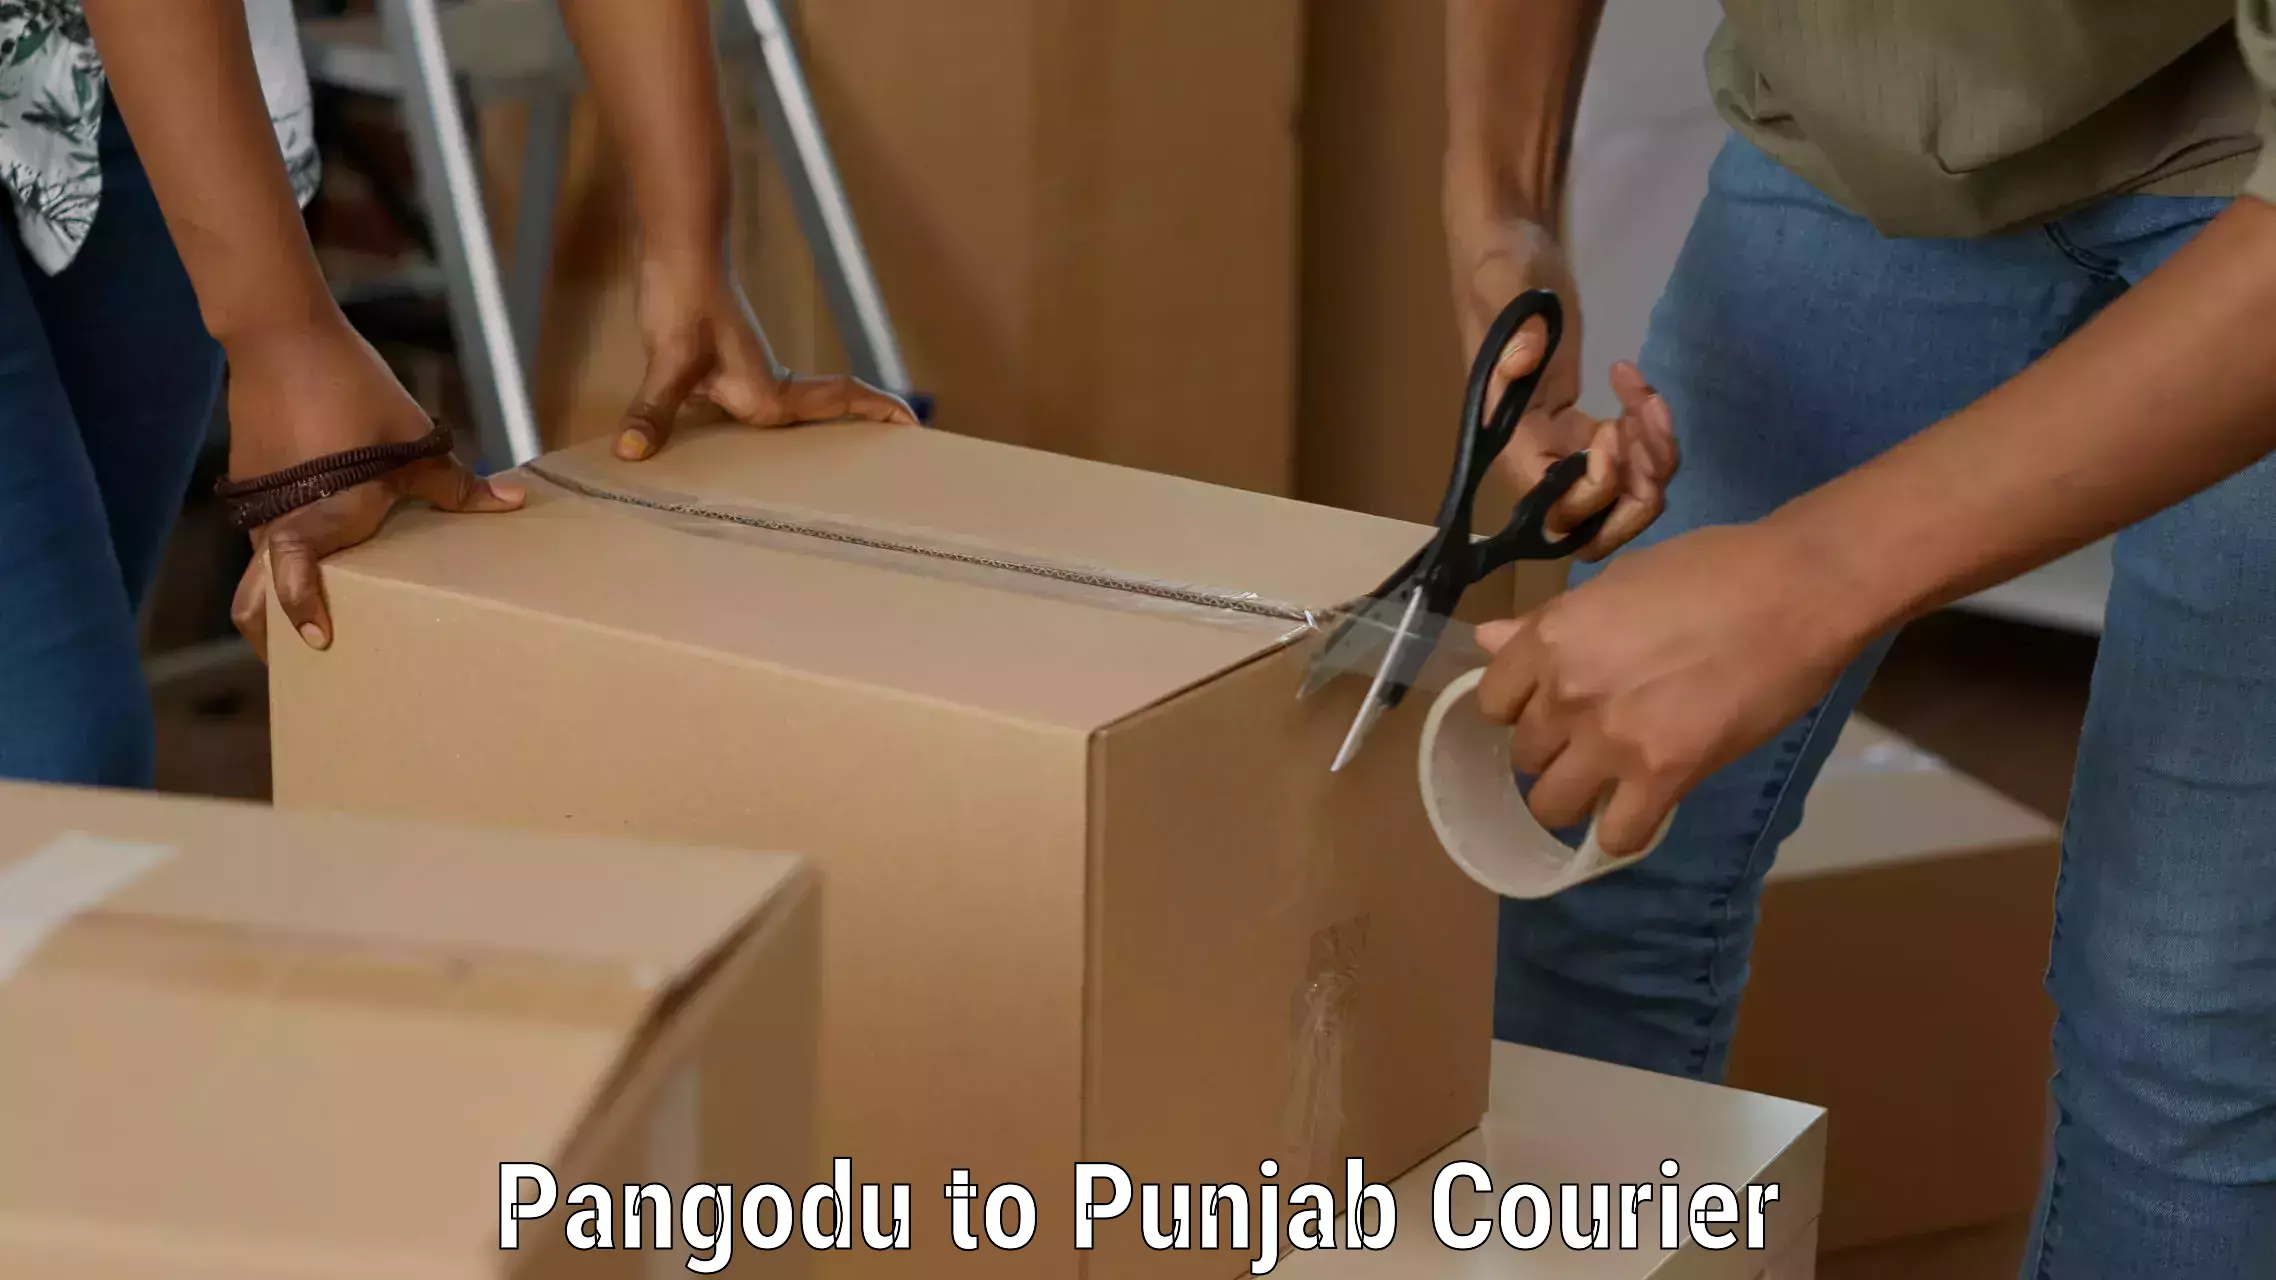 Courier service innovation Pangodu to Begowal